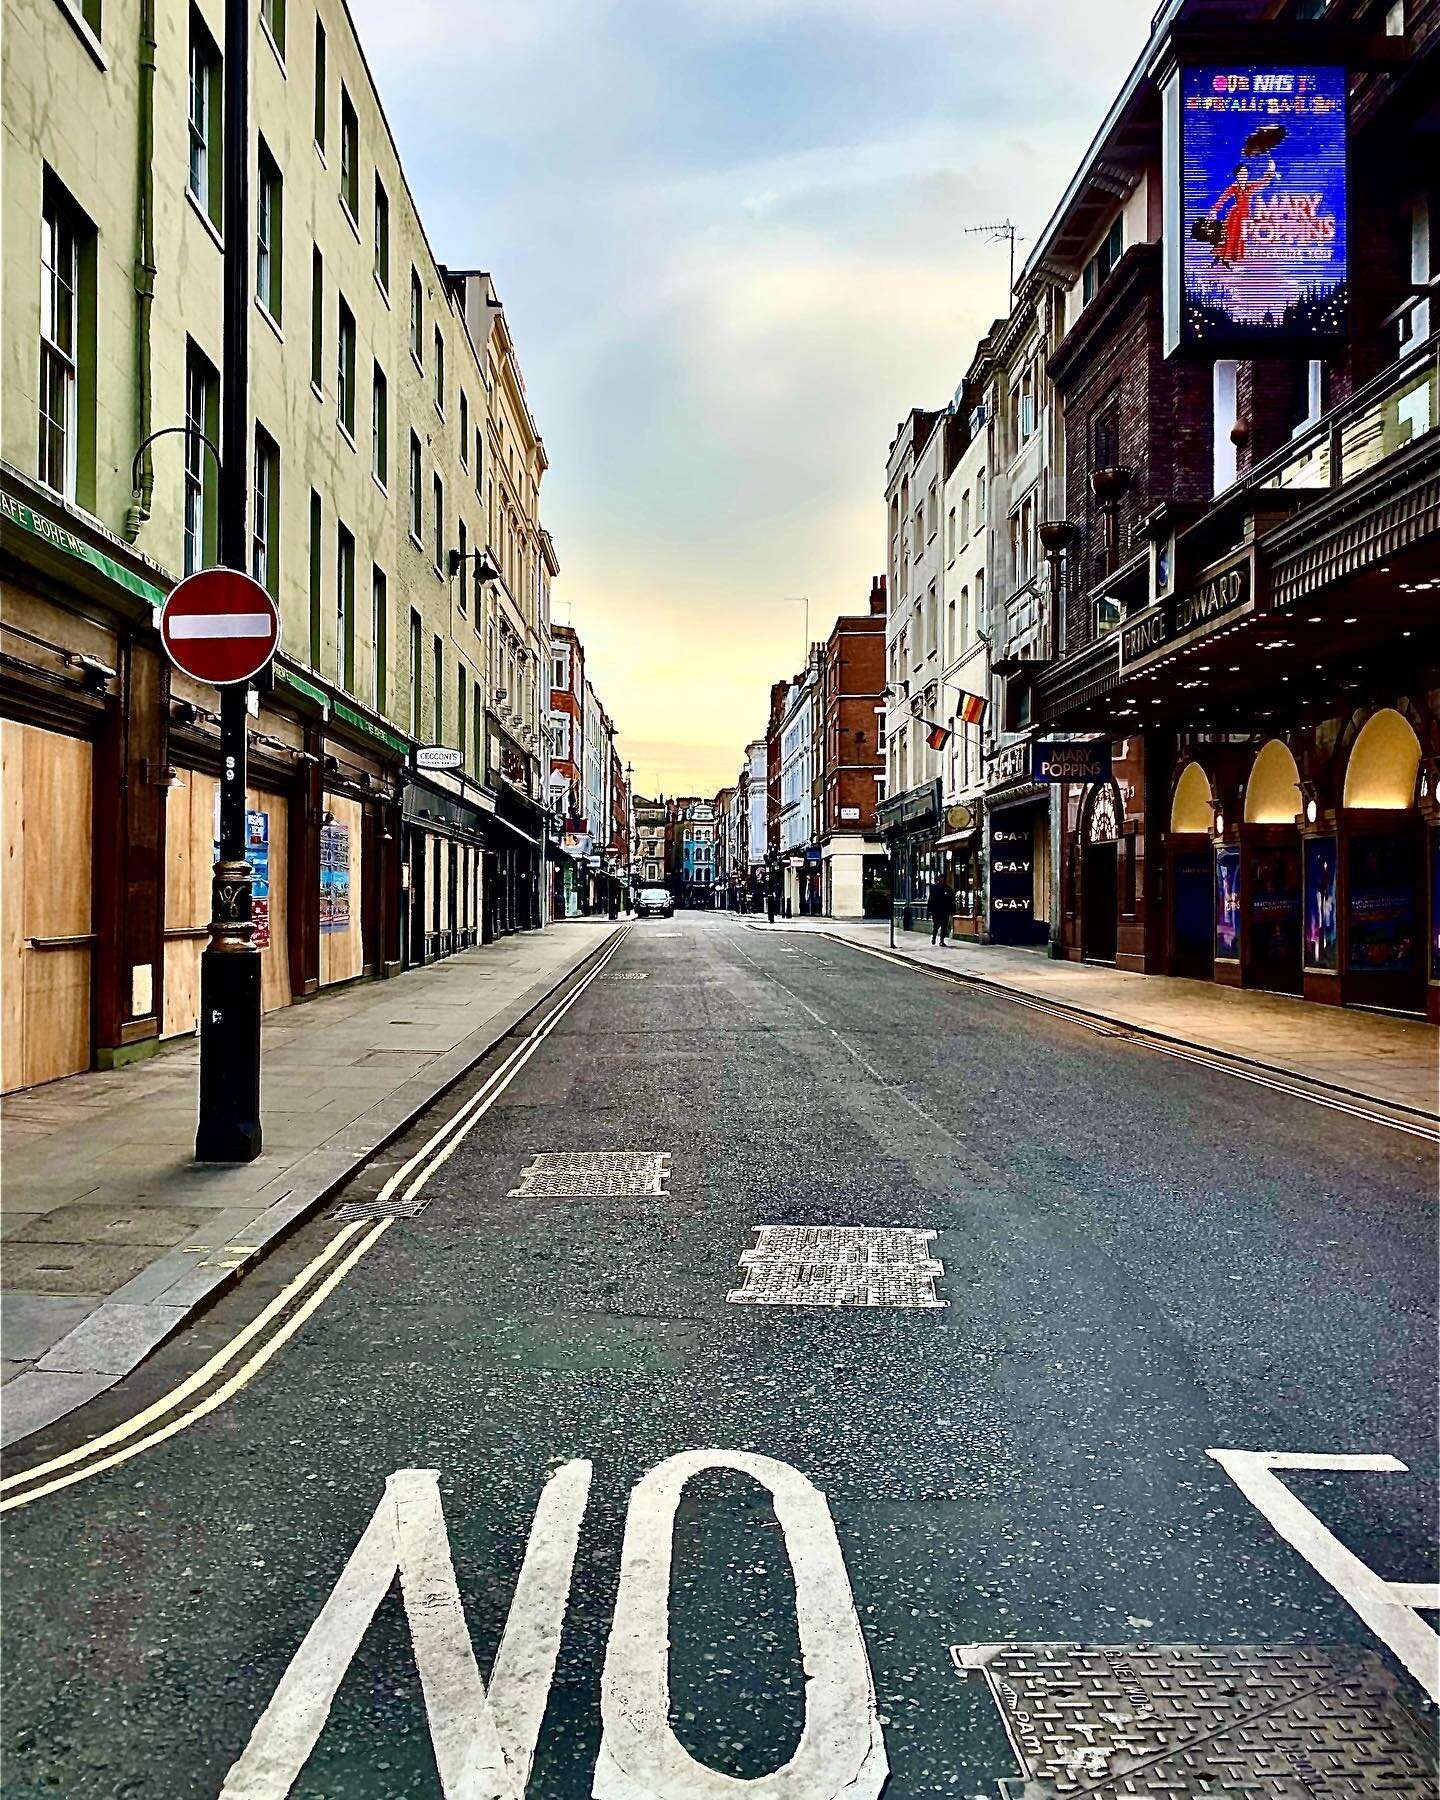 Soho - Compton Street - London - Friday 8pm 1st May 2020 ⚓️🌈 I am literally &lsquo;the only gay in the village&rsquo; 😍 Walking my neighbourhood daily with my dog and seeing the city with such different eyes. It&rsquo;s weird but also wonderful. Lo